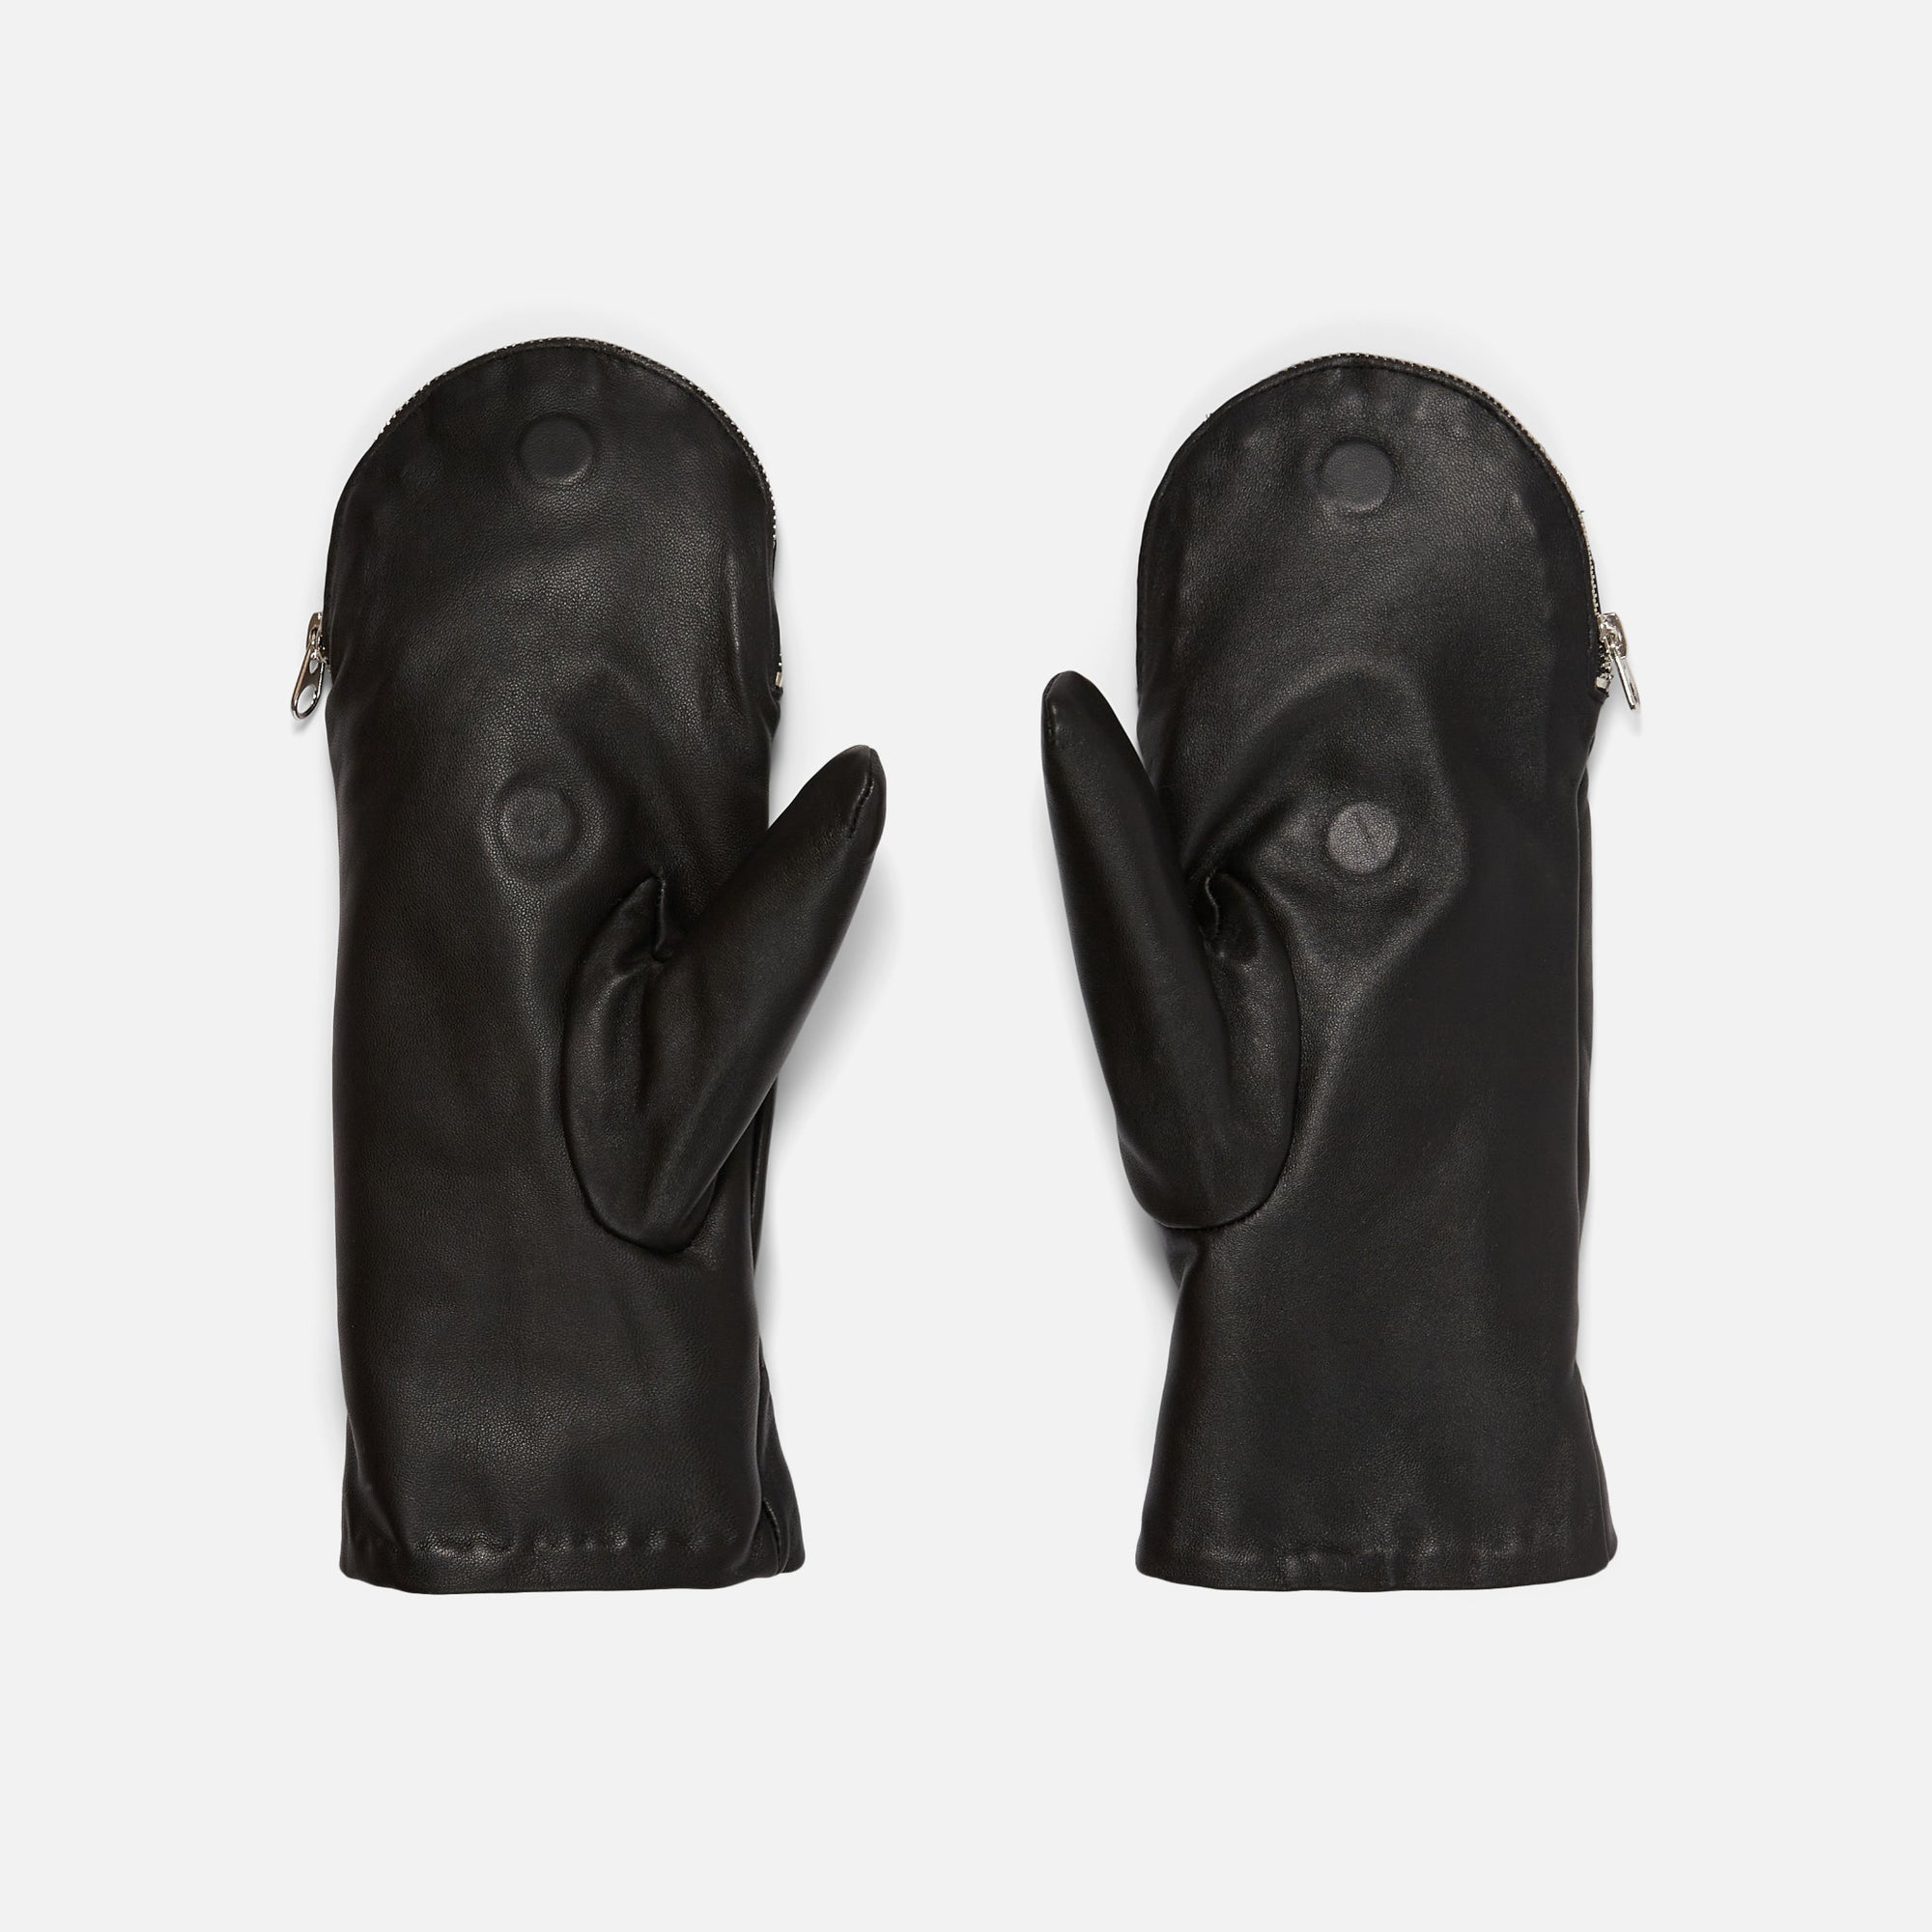 Black leather mittens with zipper